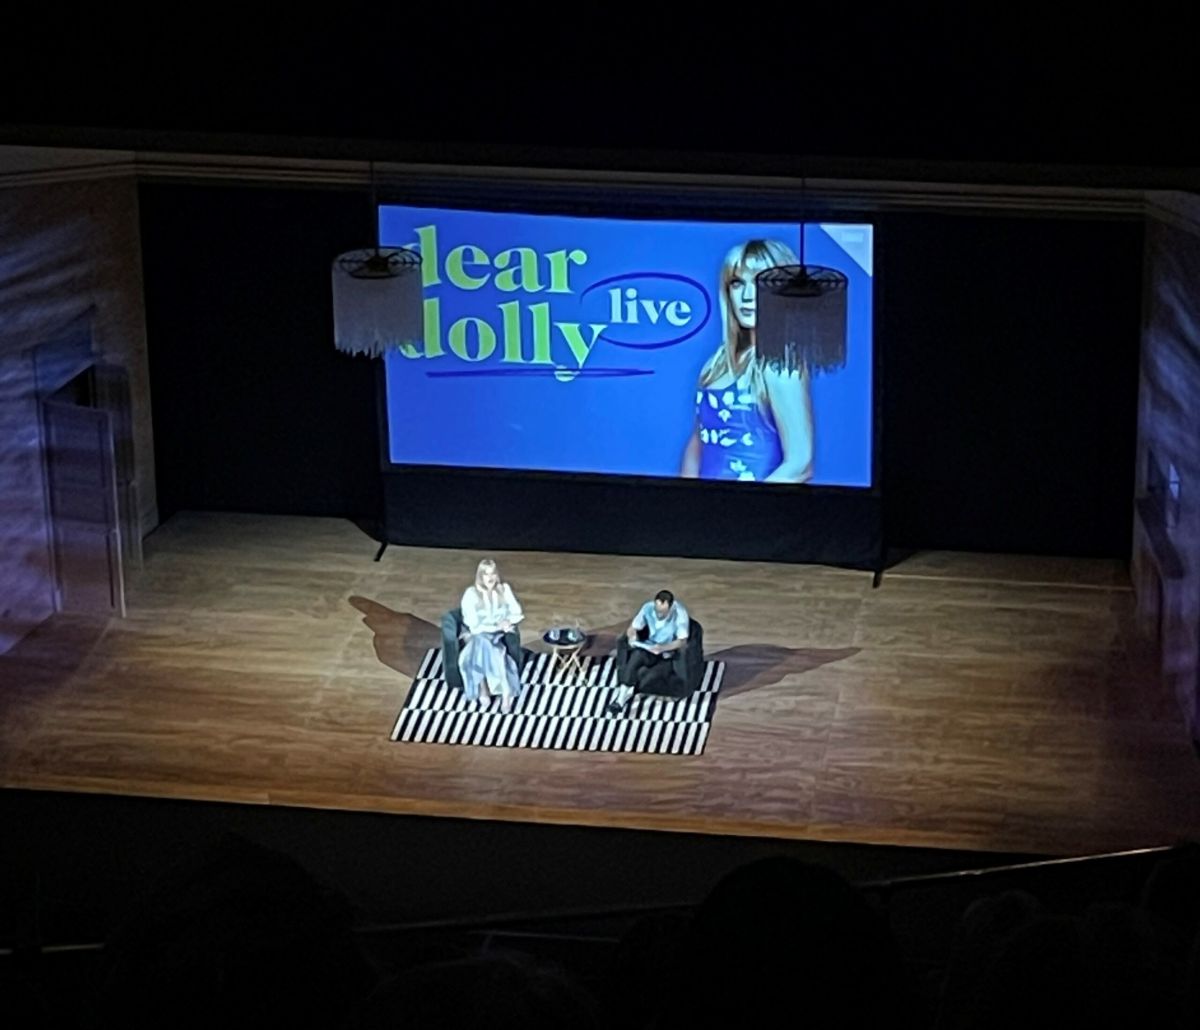 Dear Dolly Live: Sex, breakups and tipsy confessions